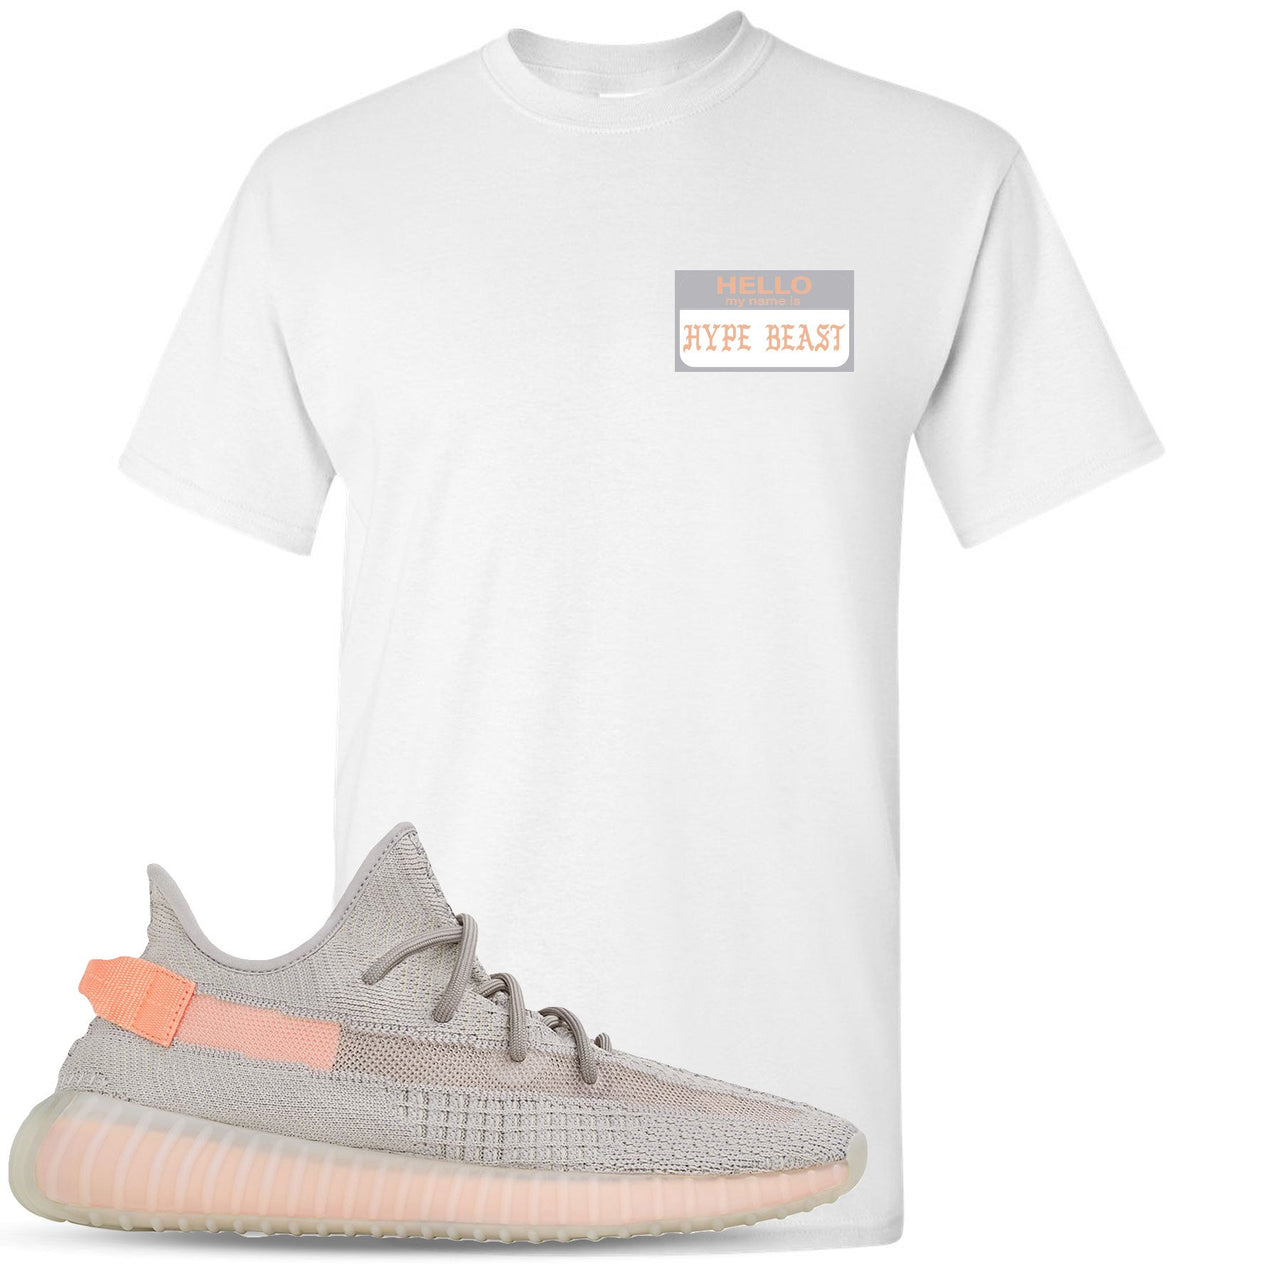 True Form v2 350s T Shirt | Hello My Name Is Hype Beast Pablo, White